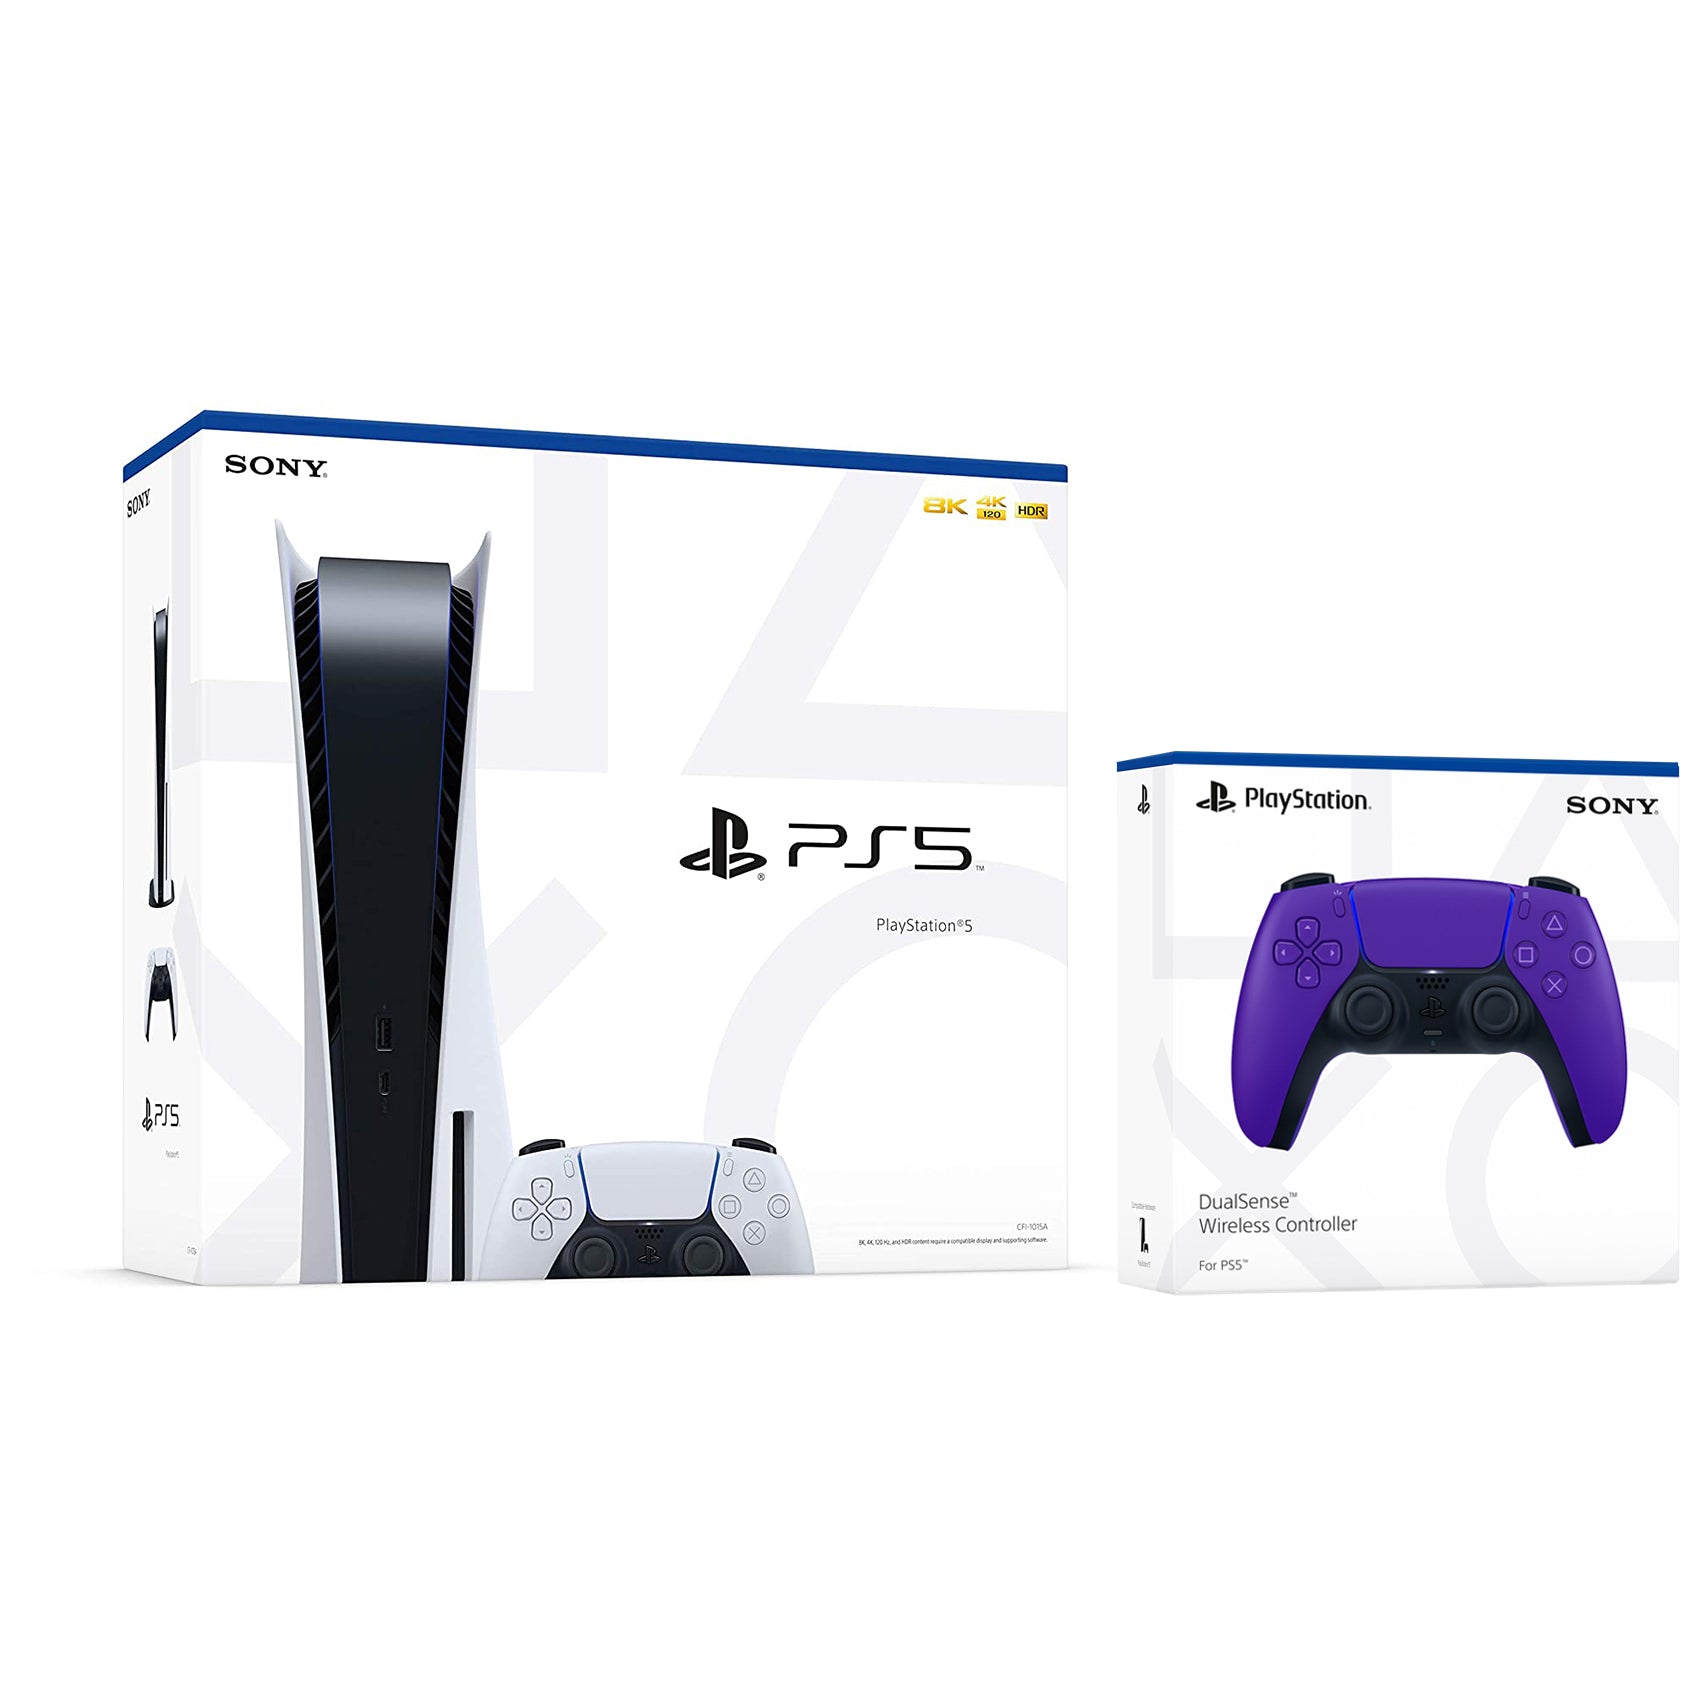 Sony Playstation 5 Disc Version (Sony PS5 Disc) with Extra Galactic Purple Controller and Black PULSE 3D Headset Bundle - Pro-Distributing